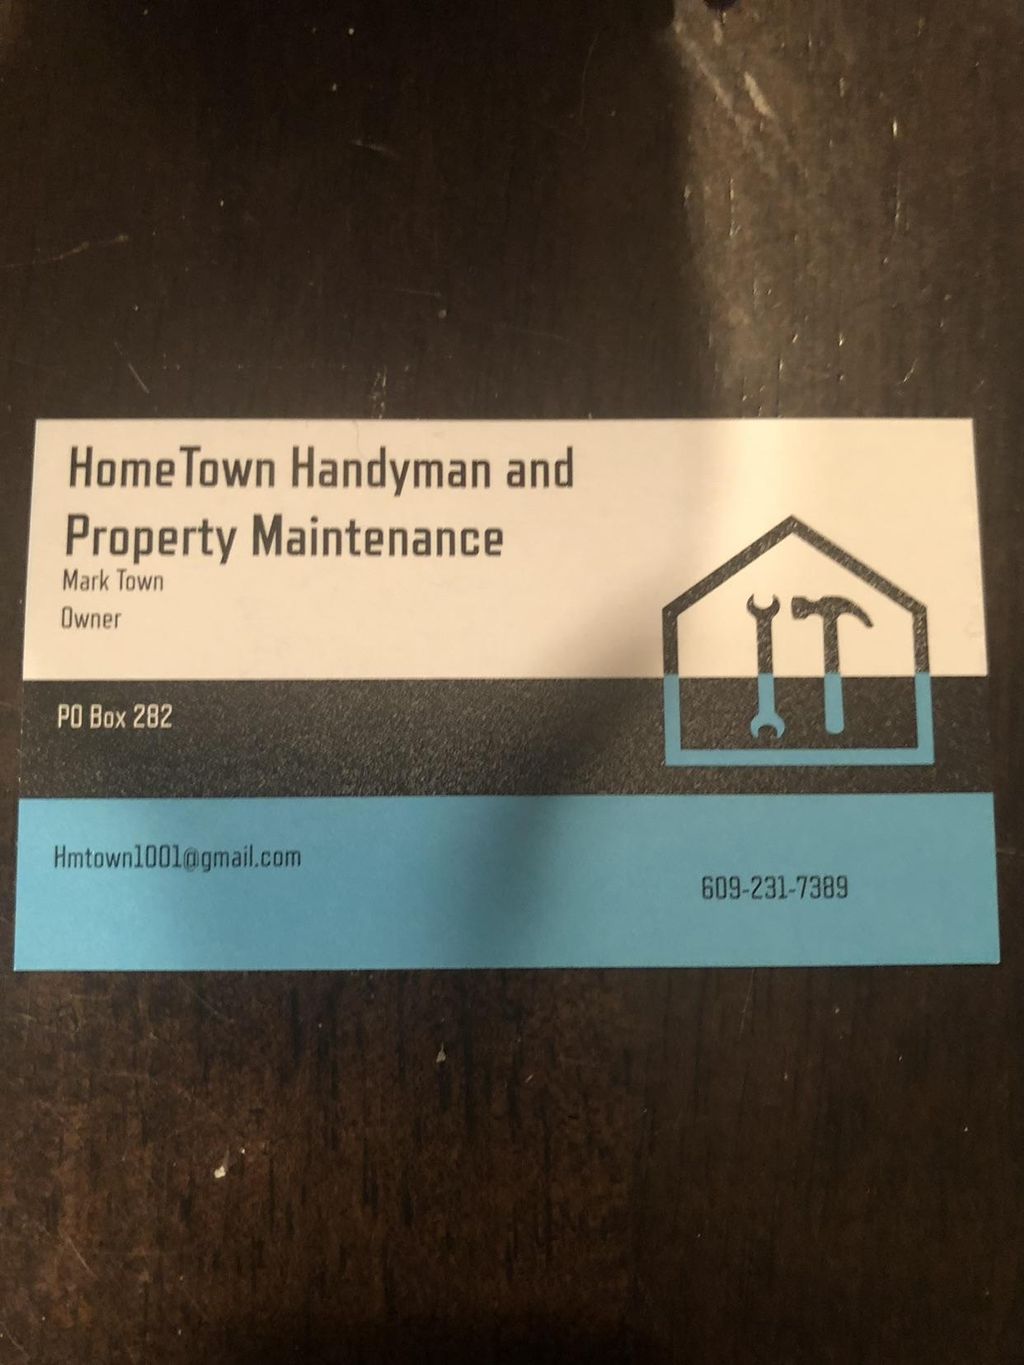 HomeTown Property Handyman and Property y